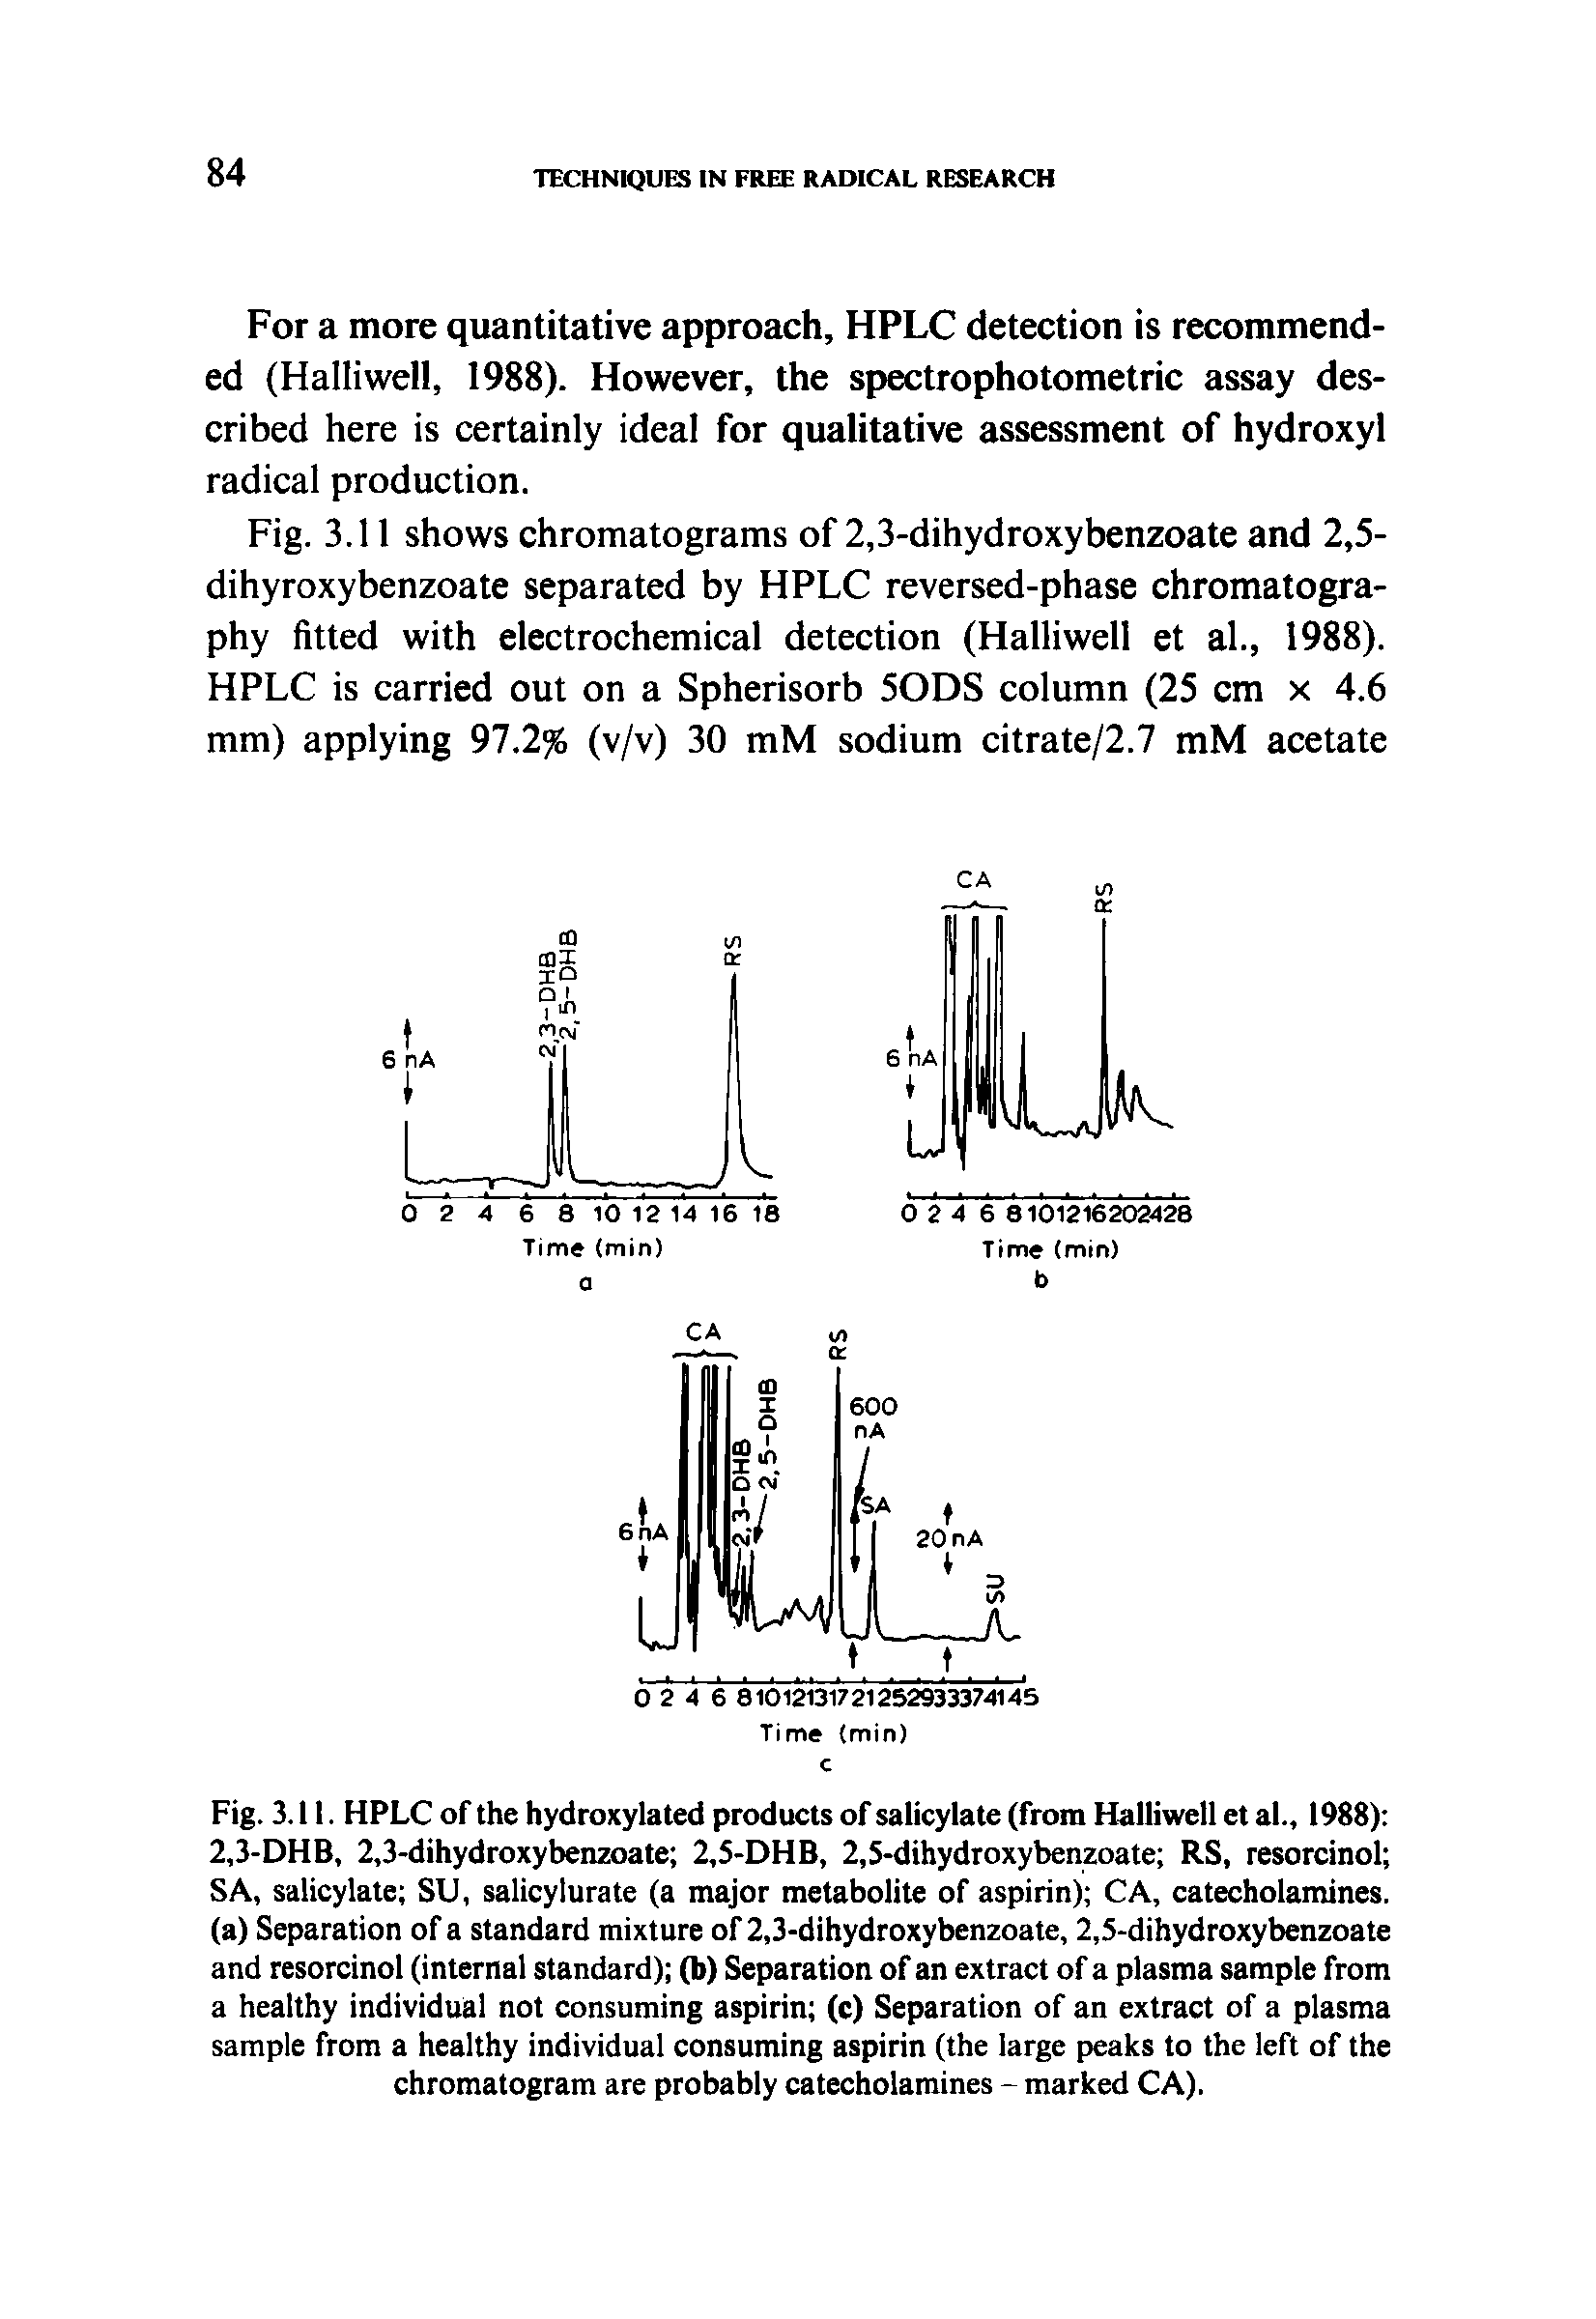 Fig. 3.11. HPLC of the hydroxylated products of salicylate (from Halliwell et al., 1988) 2,3-DHB, 2,3-dihydroxybenzoate 2,5-DHB, 2,5-dihydroxybenzoate RS, resorcinol SA, salicylate SU, salicylurate (a major metabolite of aspirin) CA, catecholamines, (a) Separation of a standard mixture of 2,3-dihydroxybenzoate, 2,5-dihydroxybenzoate and resorcinol (internal standard) (b) Separation of an extract of a plasma sample from a healthy individual not consuming aspirin (c) Separation of an extract of a plasma sample from a healthy individual consuming aspirin (the large peaks to the left of the chromatogram are probably catecholamines - marked CA).